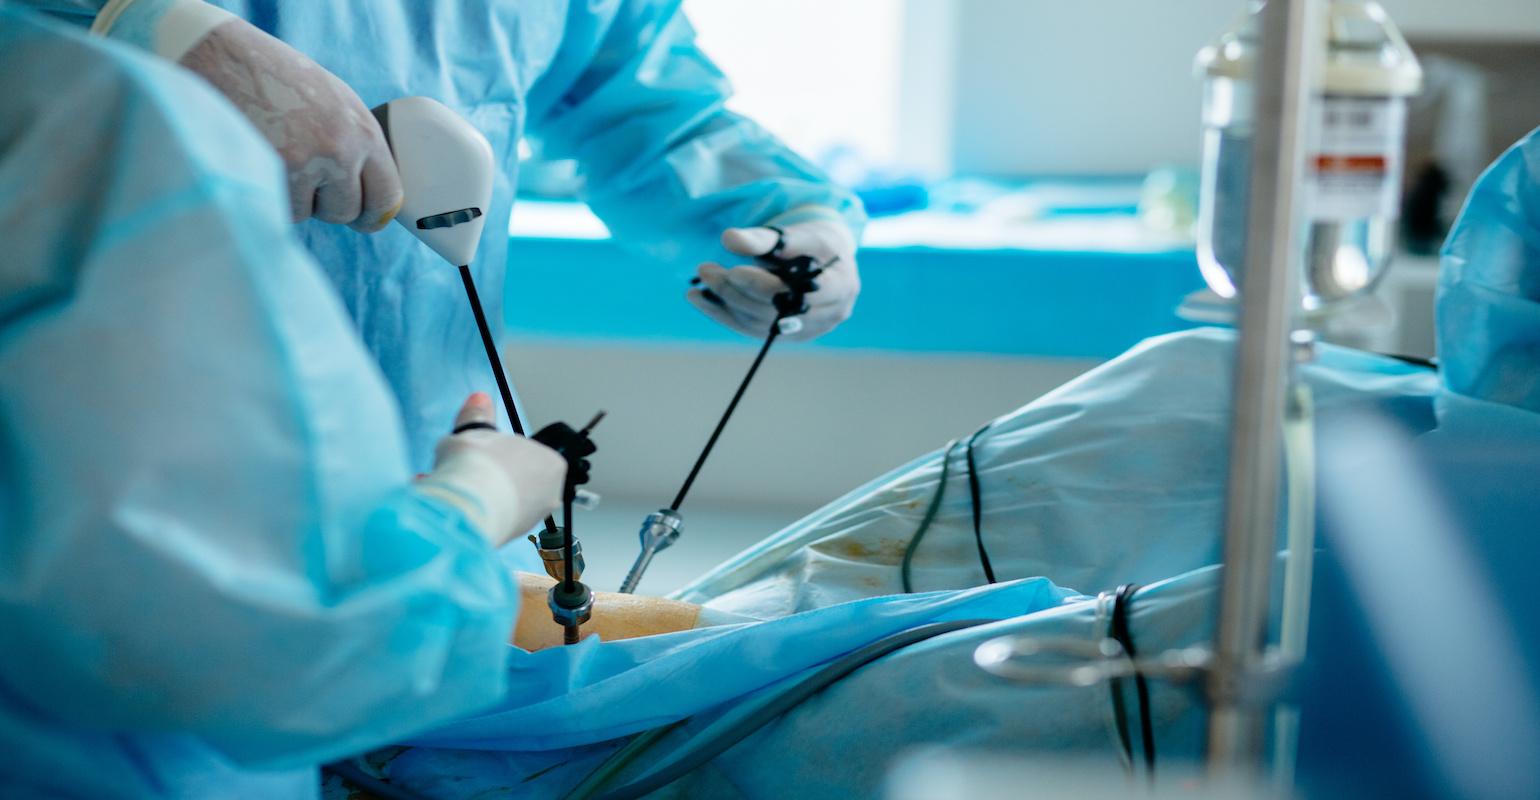 Minimally invasive device technology and surgery are becoming accepted ...